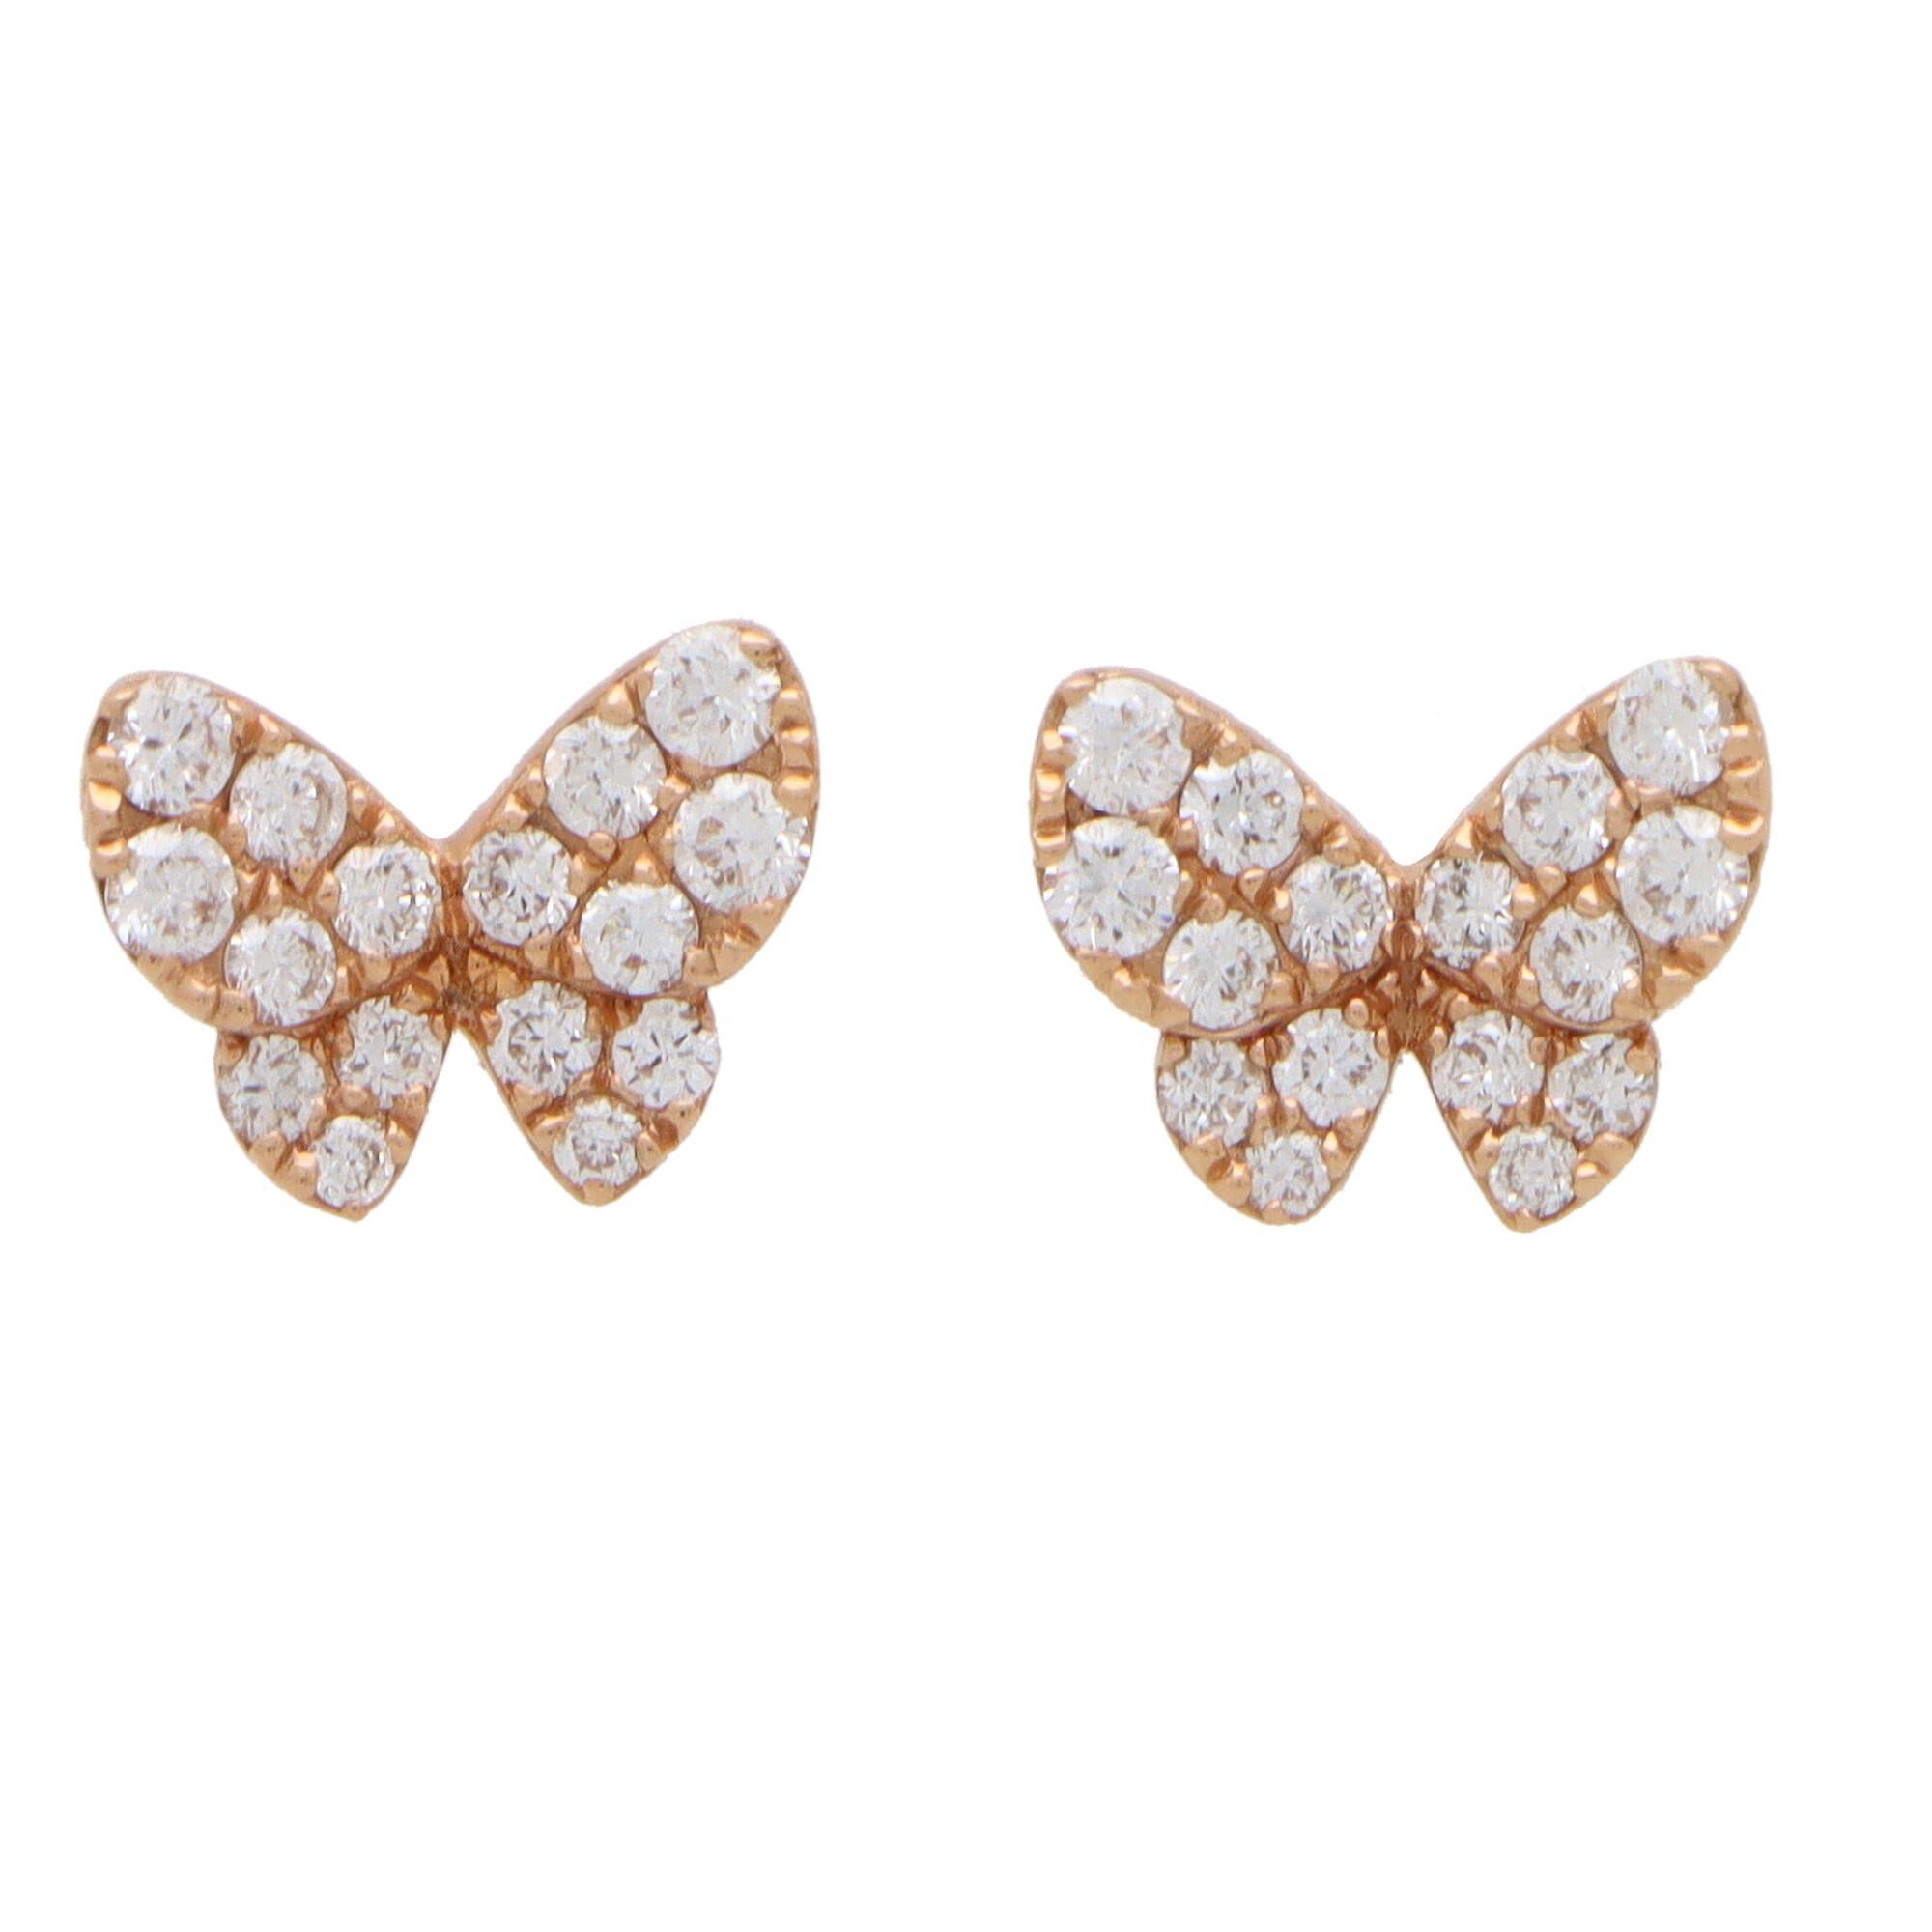 A beautiful pair of modern diamond set butterfly earrings set in 18k rose gold.

Each stud earring is pave set throughout with 16 round brilliant cut diamonds. Due to their design and size these studs would make a perfect pair of everyday earrings.